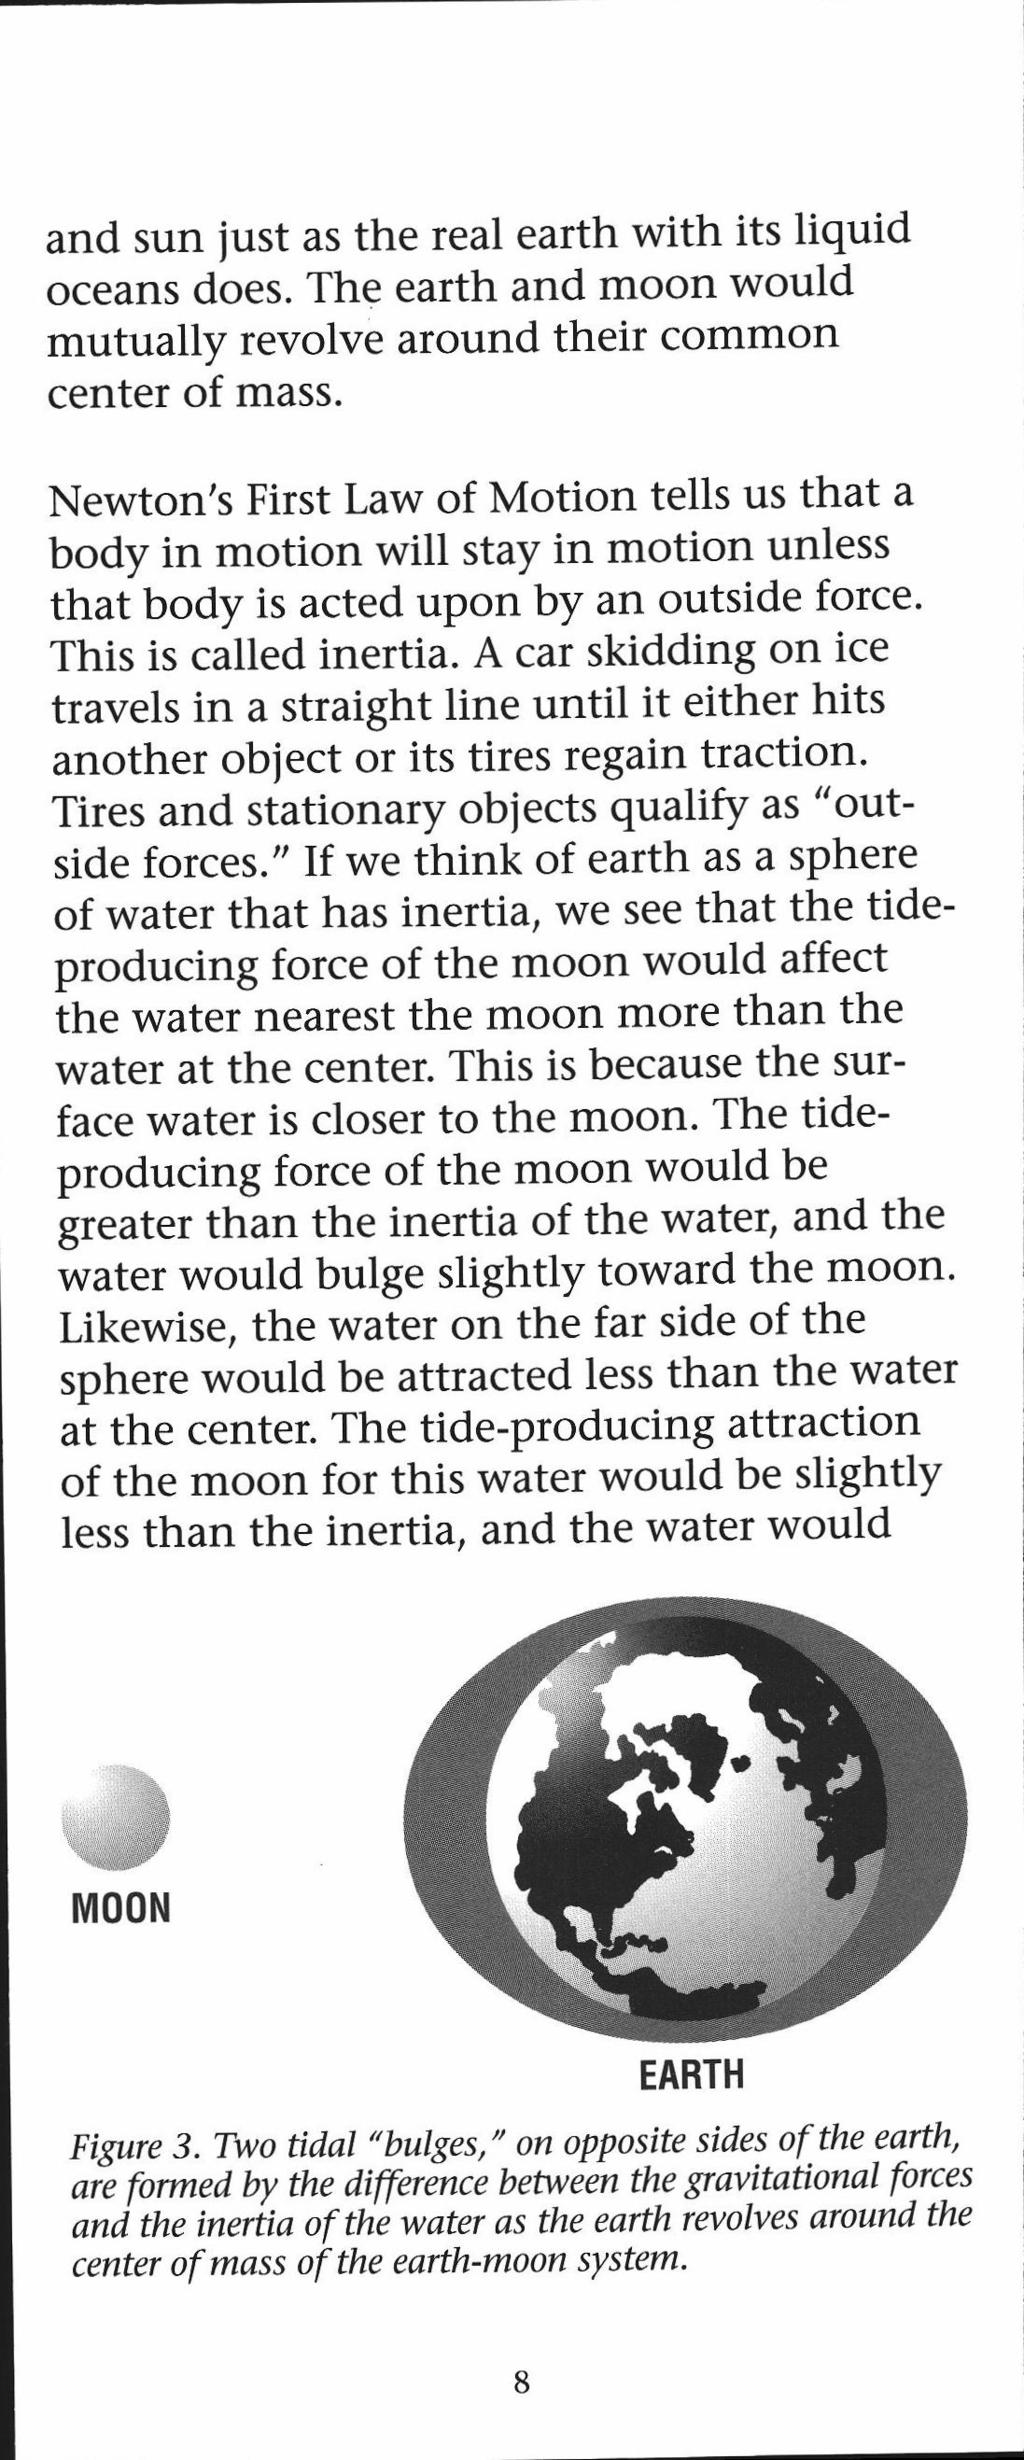 and sun just as the real earth with its liquid oceans does. The earth and moon would mutually revolve around their common center of mass.